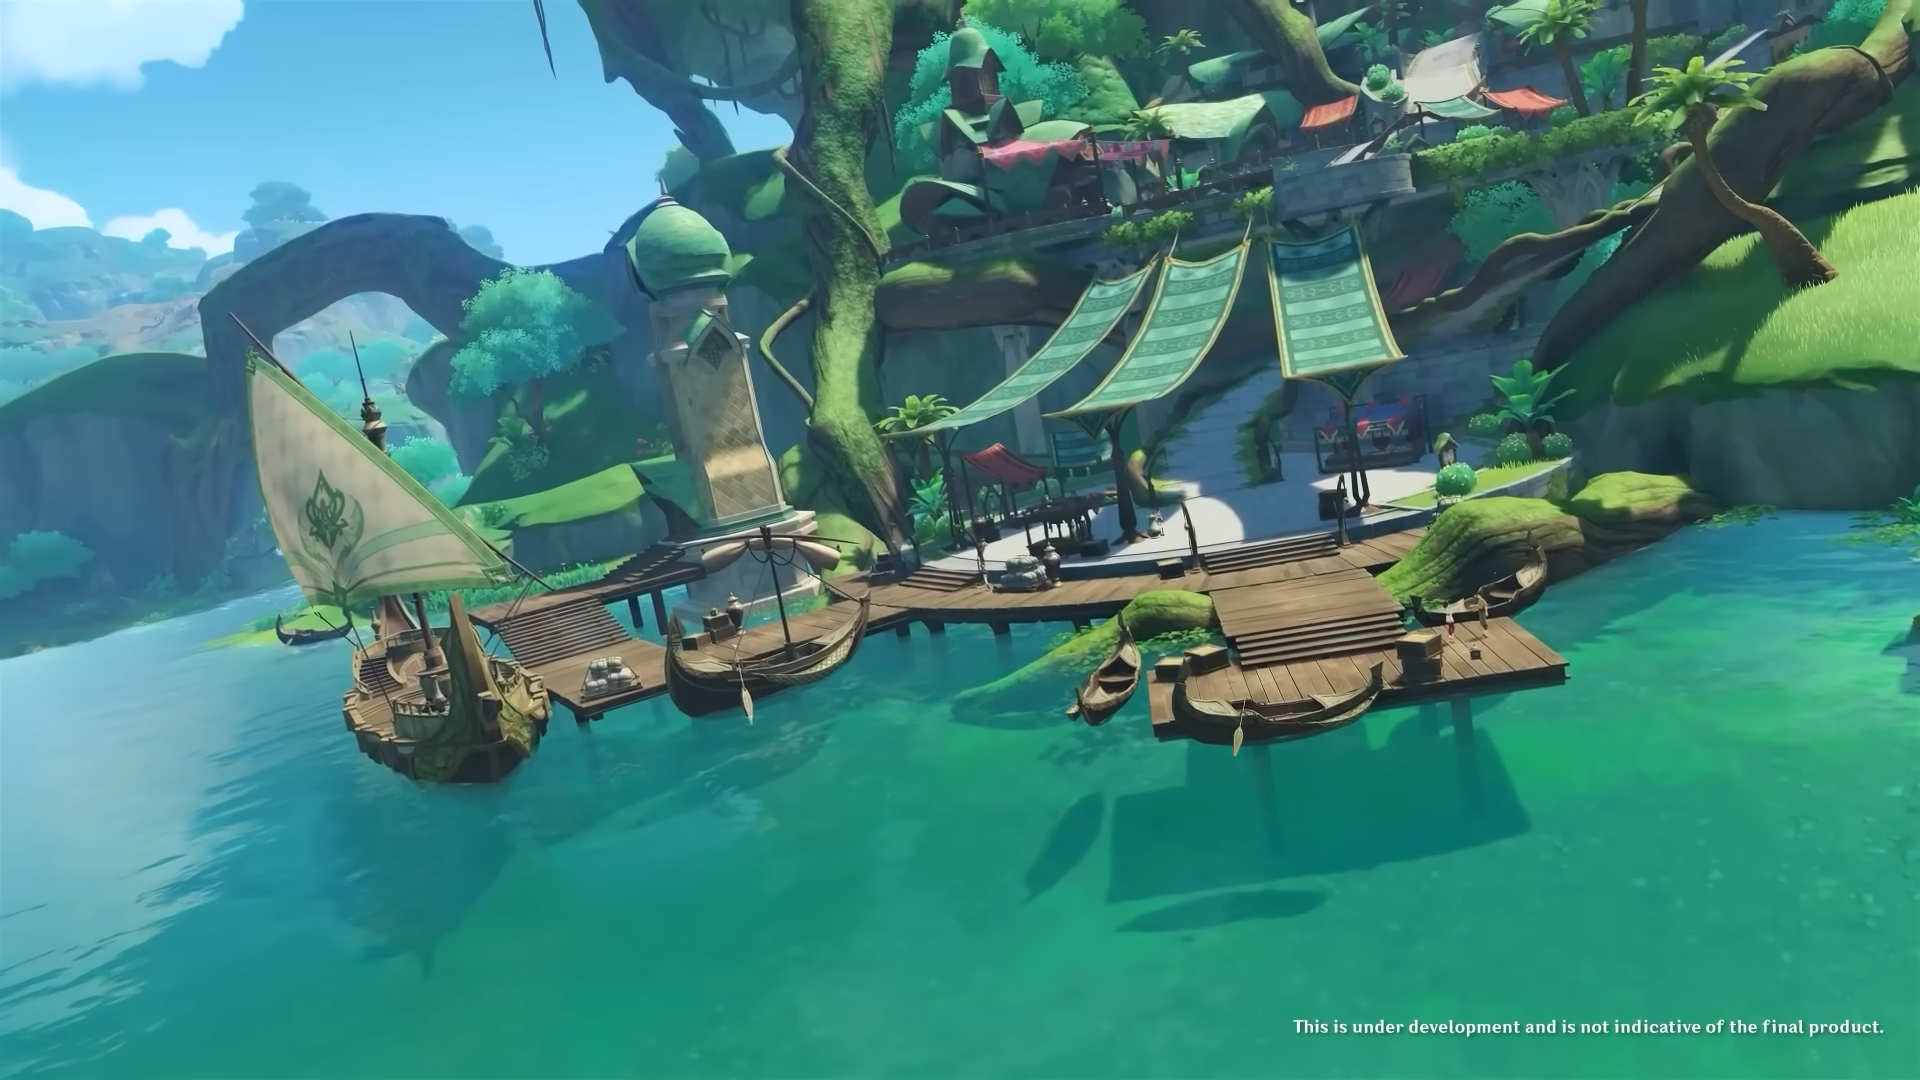 A teaser trailer scene showing Sumeru in Genshin Impact: a harbour, as viewed from the sea.